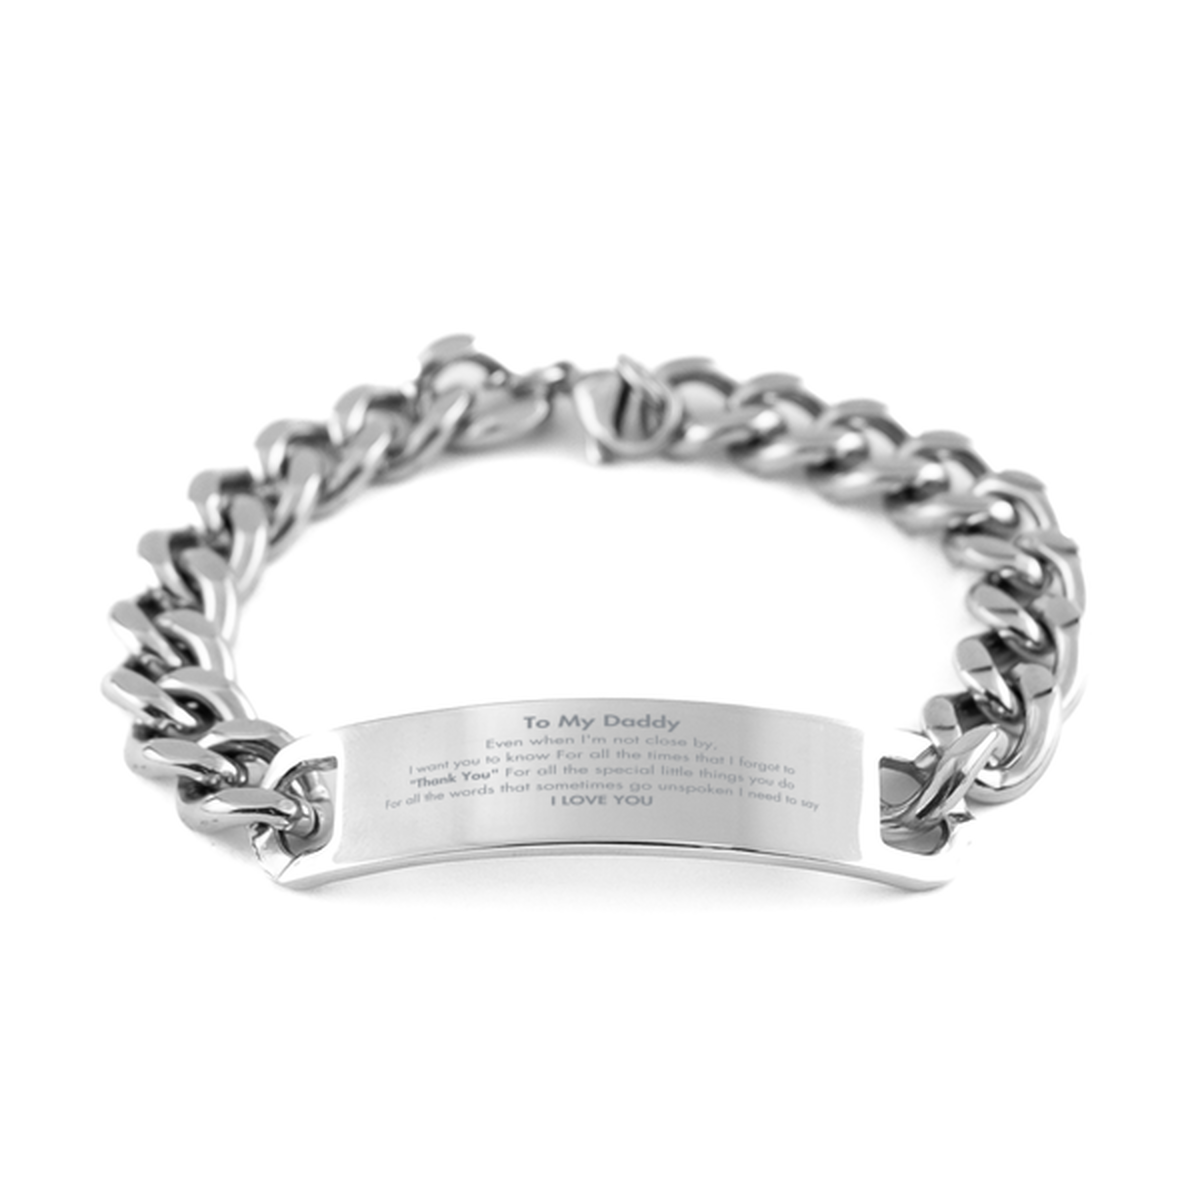 Thank You Gifts for Daddy, Keepsake Cuban Chain Stainless Steel Bracelet Gifts for Daddy Birthday Mother's day Father's Day Daddy For all the words That sometimes go unspoken I need to say I LOVE YOU